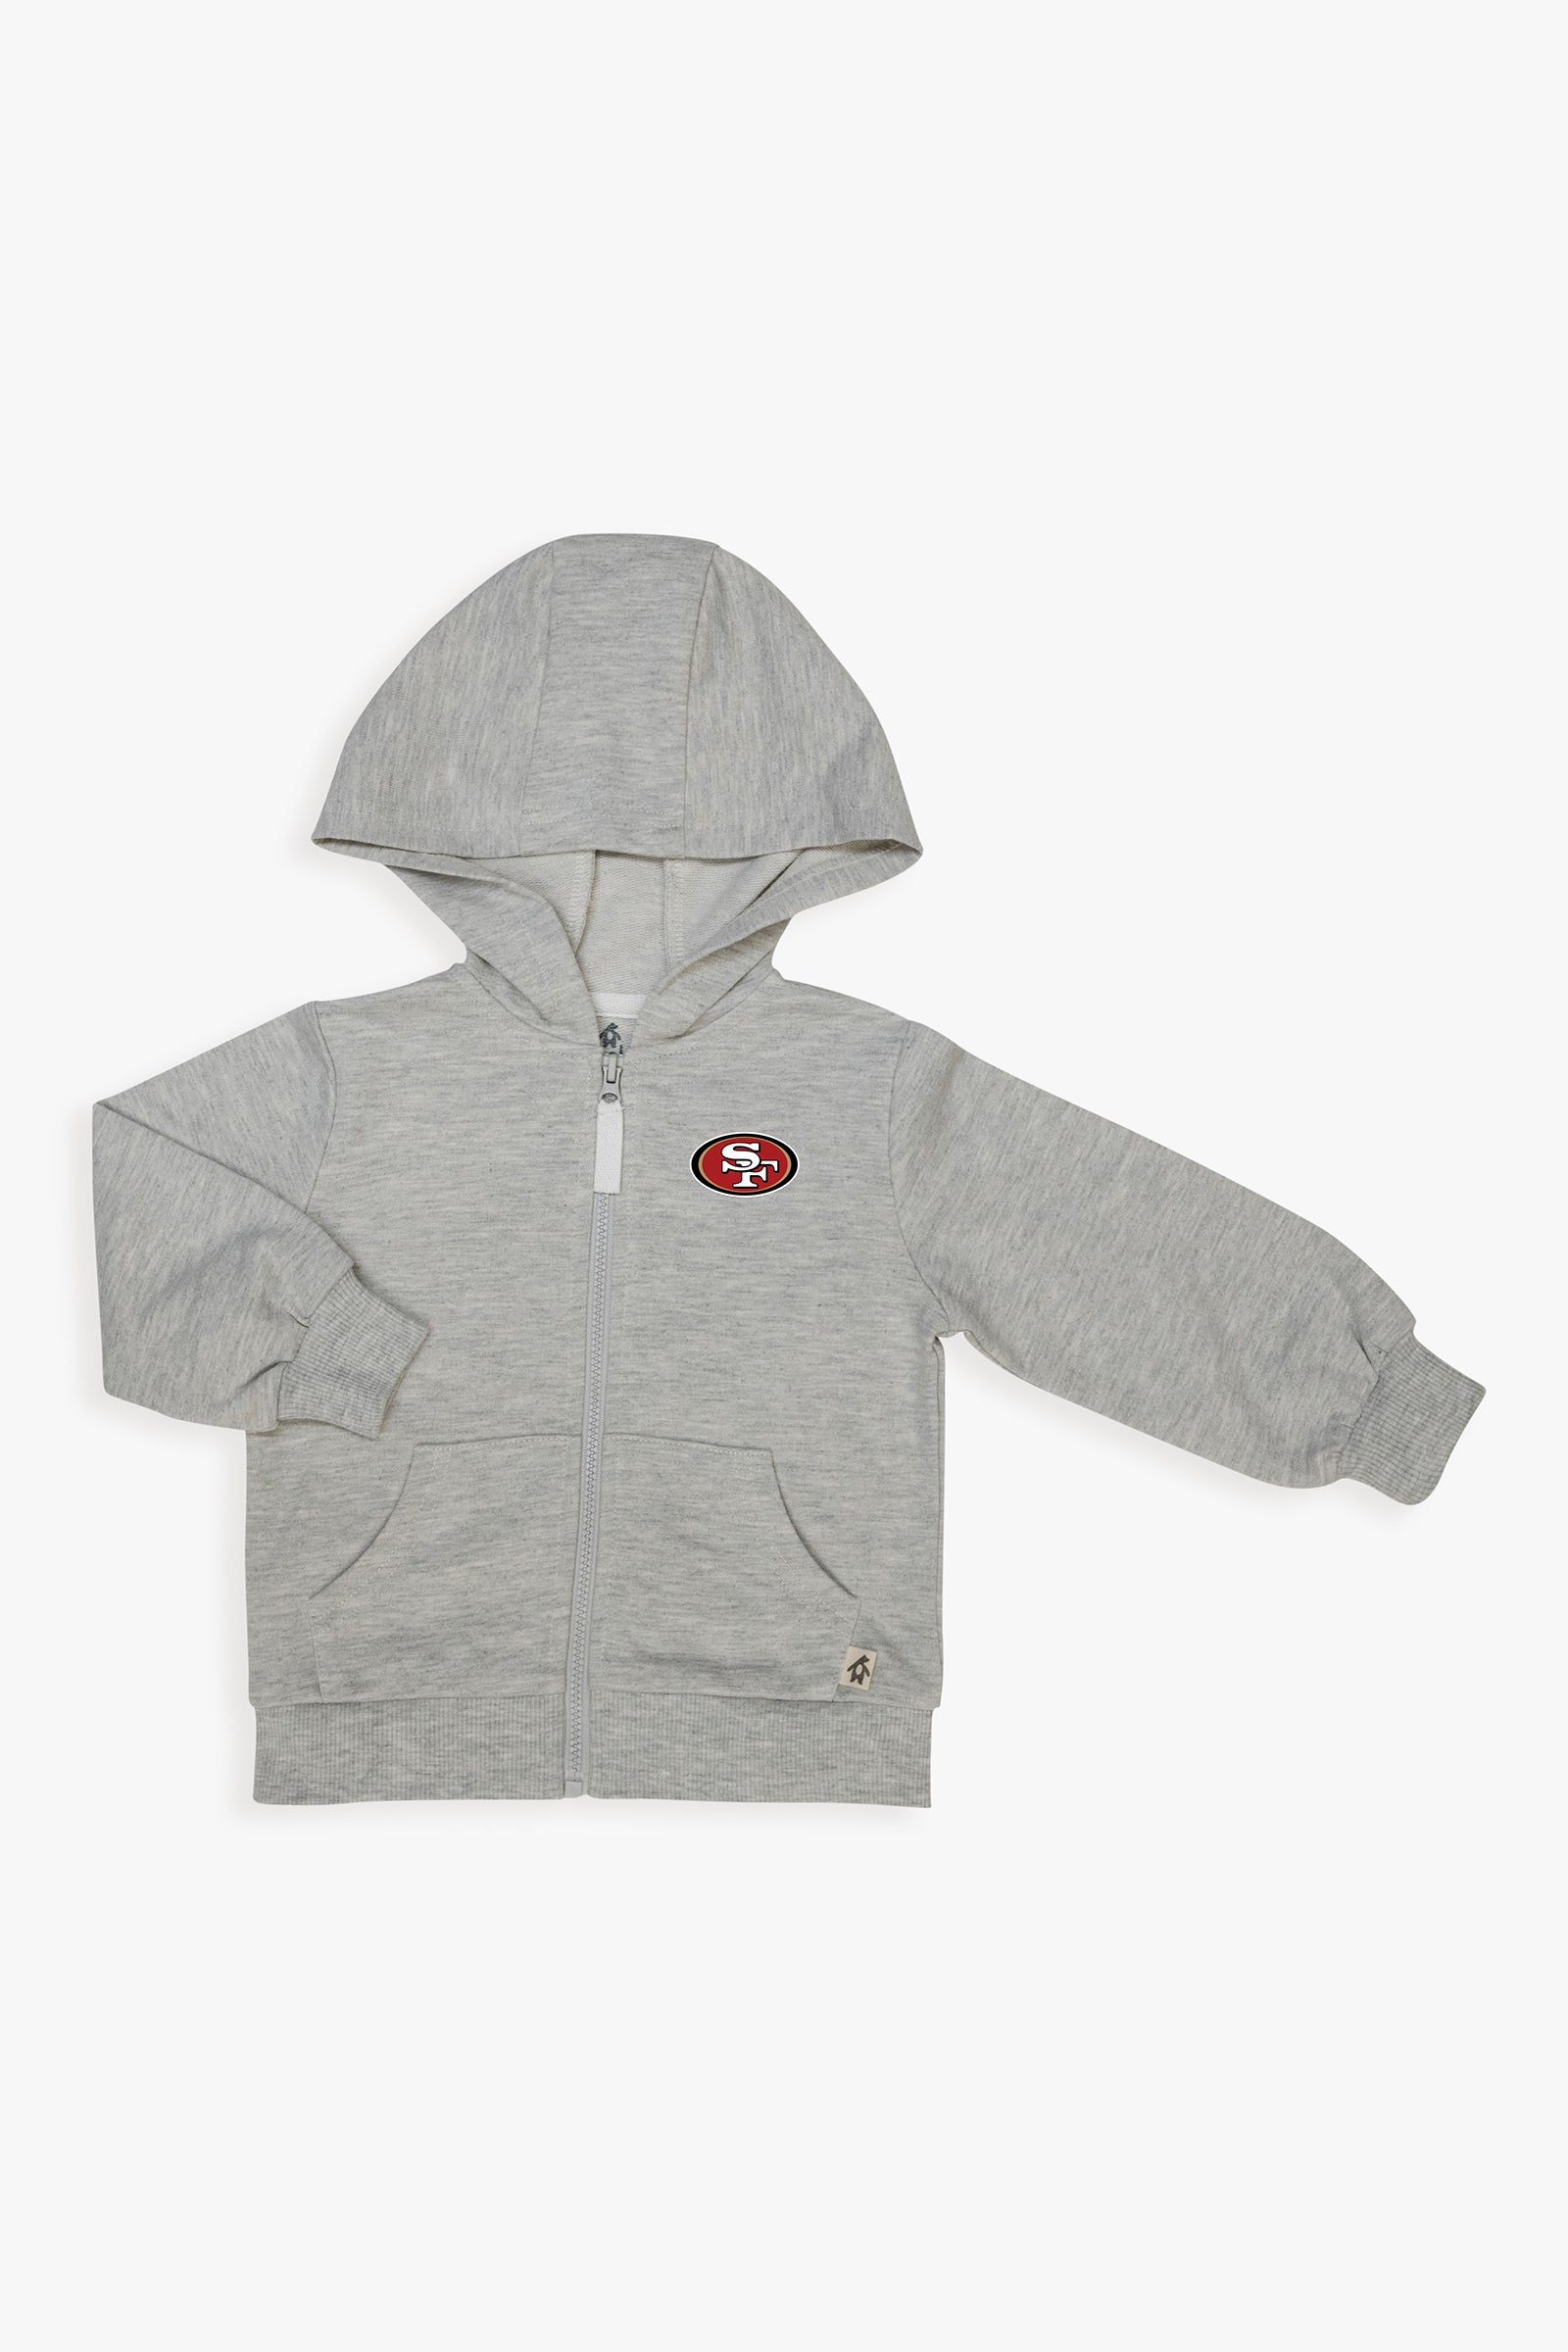 Logo French Baby Grey Unisex Zip-Up NFL Football Toddler Hoodie Terry Team